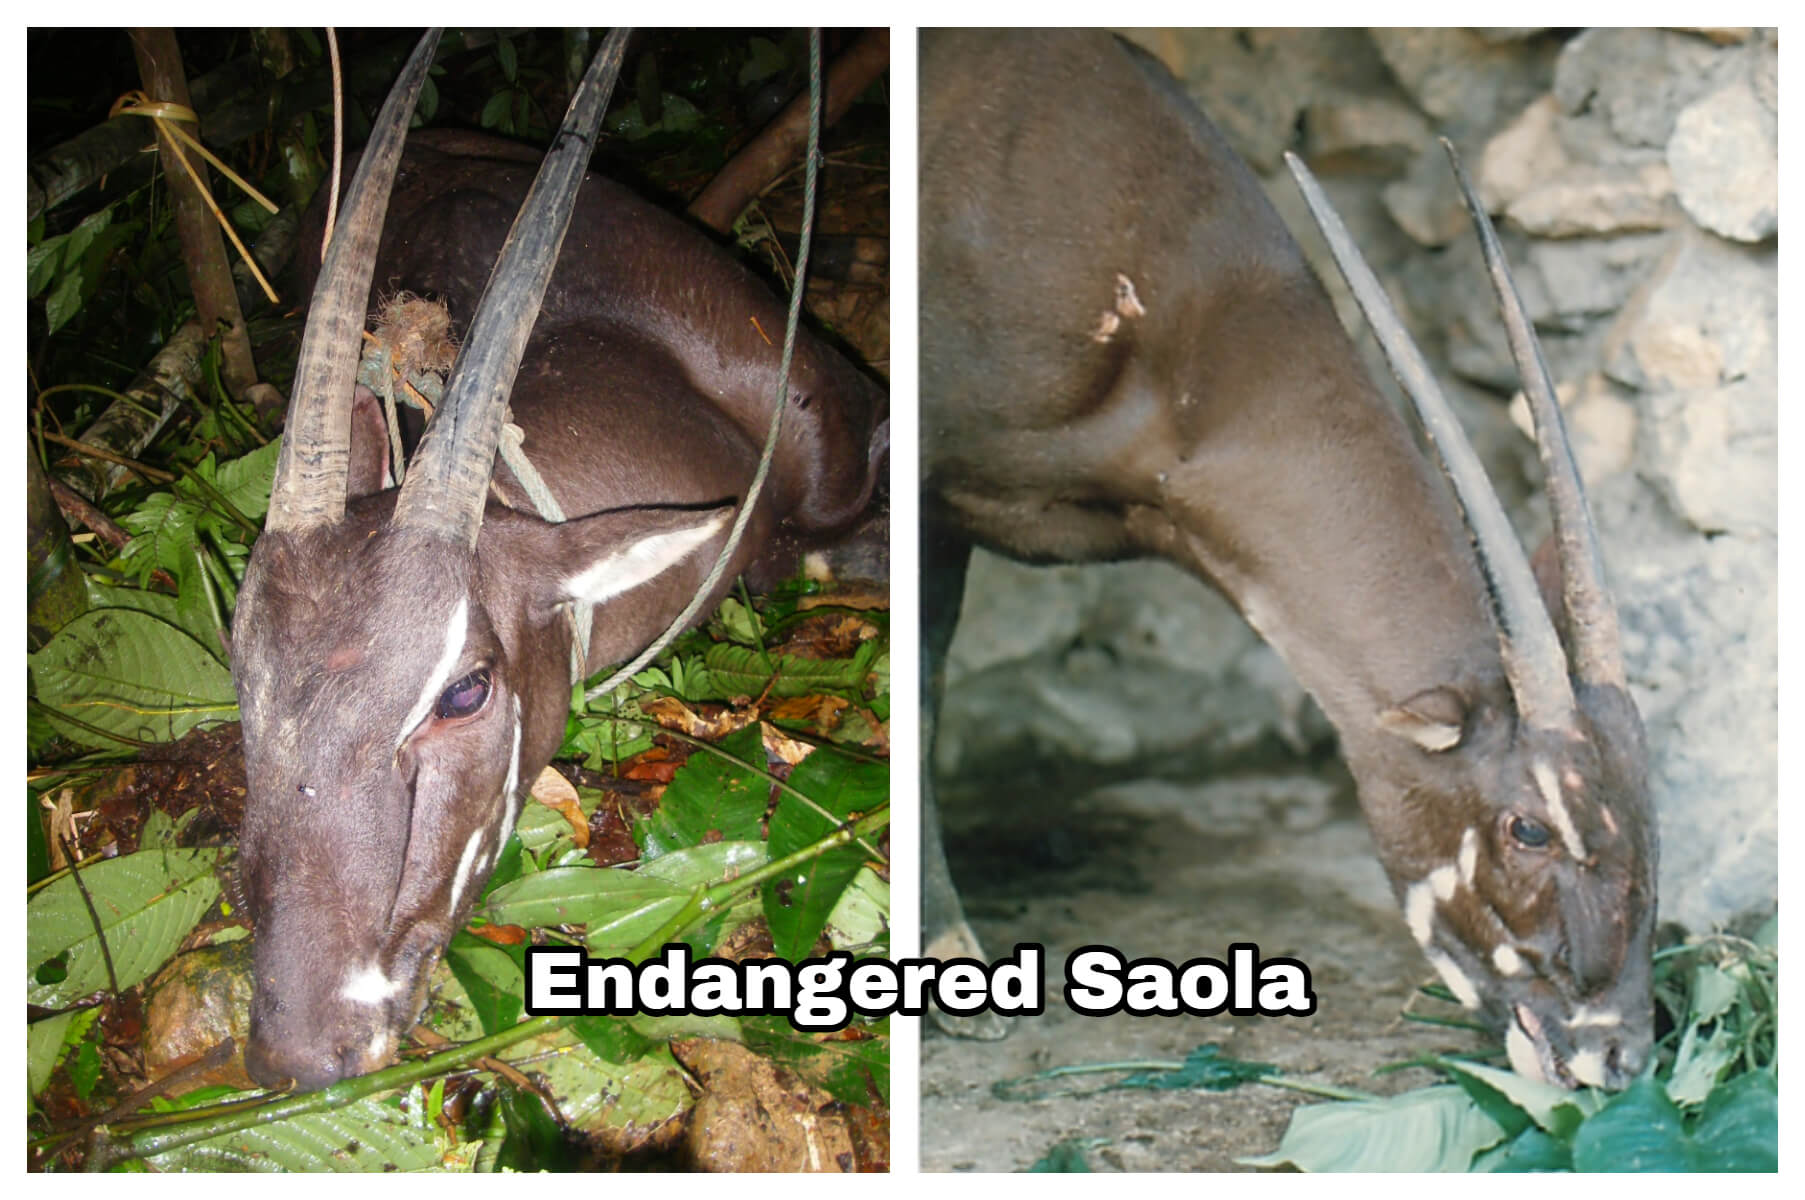 5 Facts About Saola Animal - Why Is the Saola Endangered?